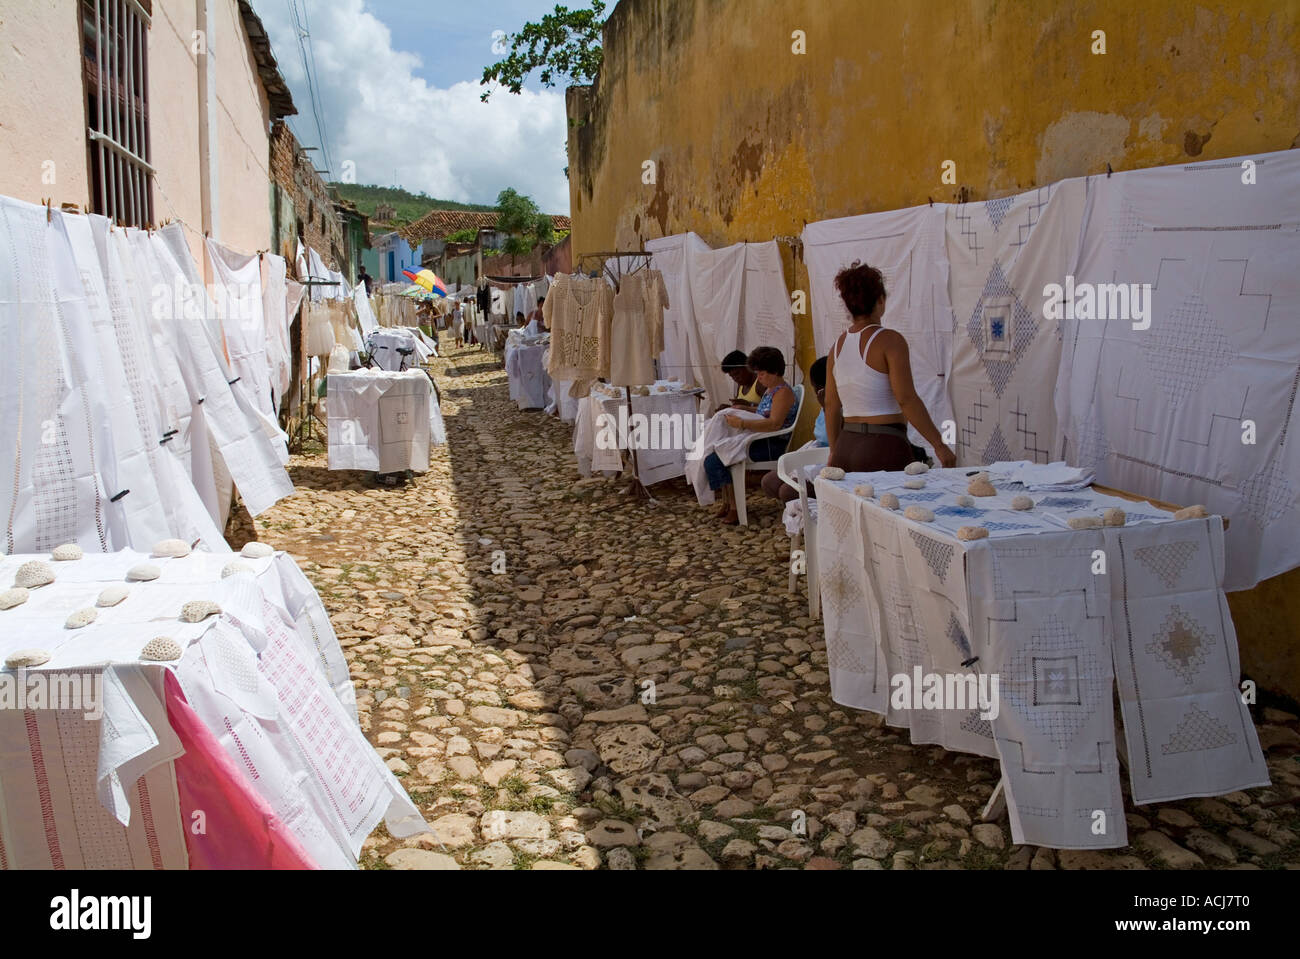 Woman looking at lace sheets and tablecloths for sale at a street market, Trinidad, Cuba. Stock Photo